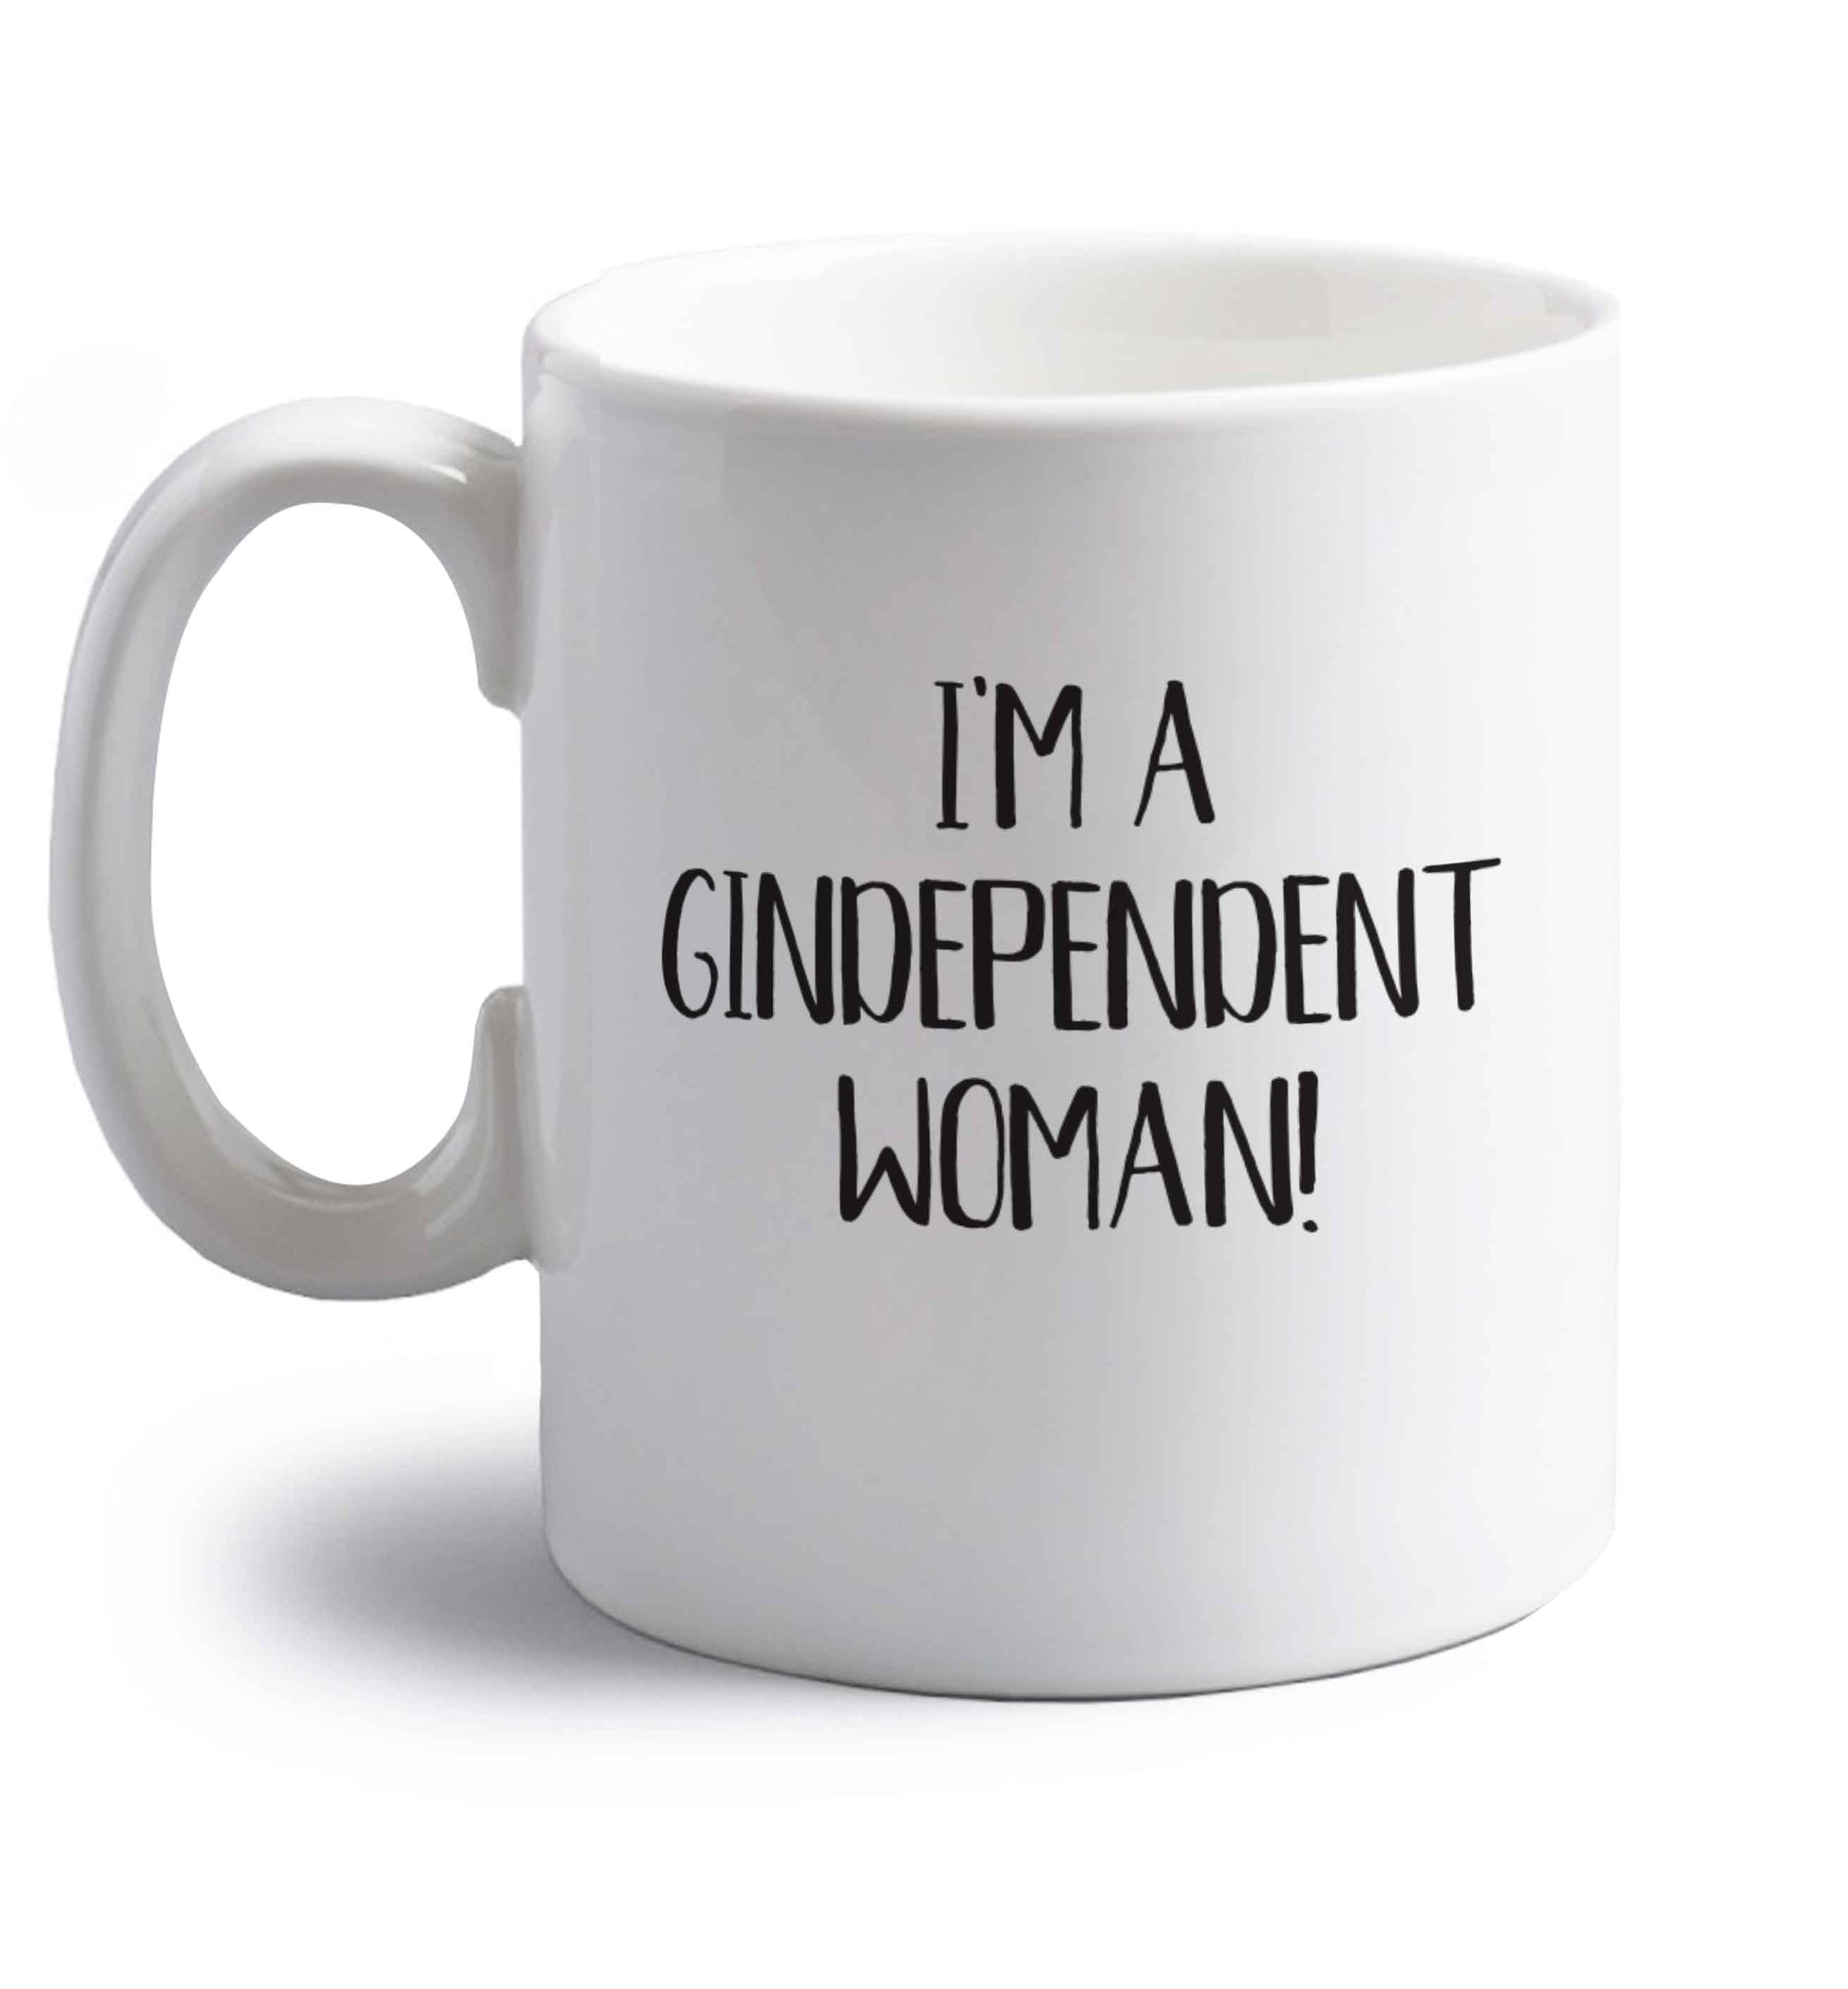 I'm a gindependent woman right handed white ceramic mug 